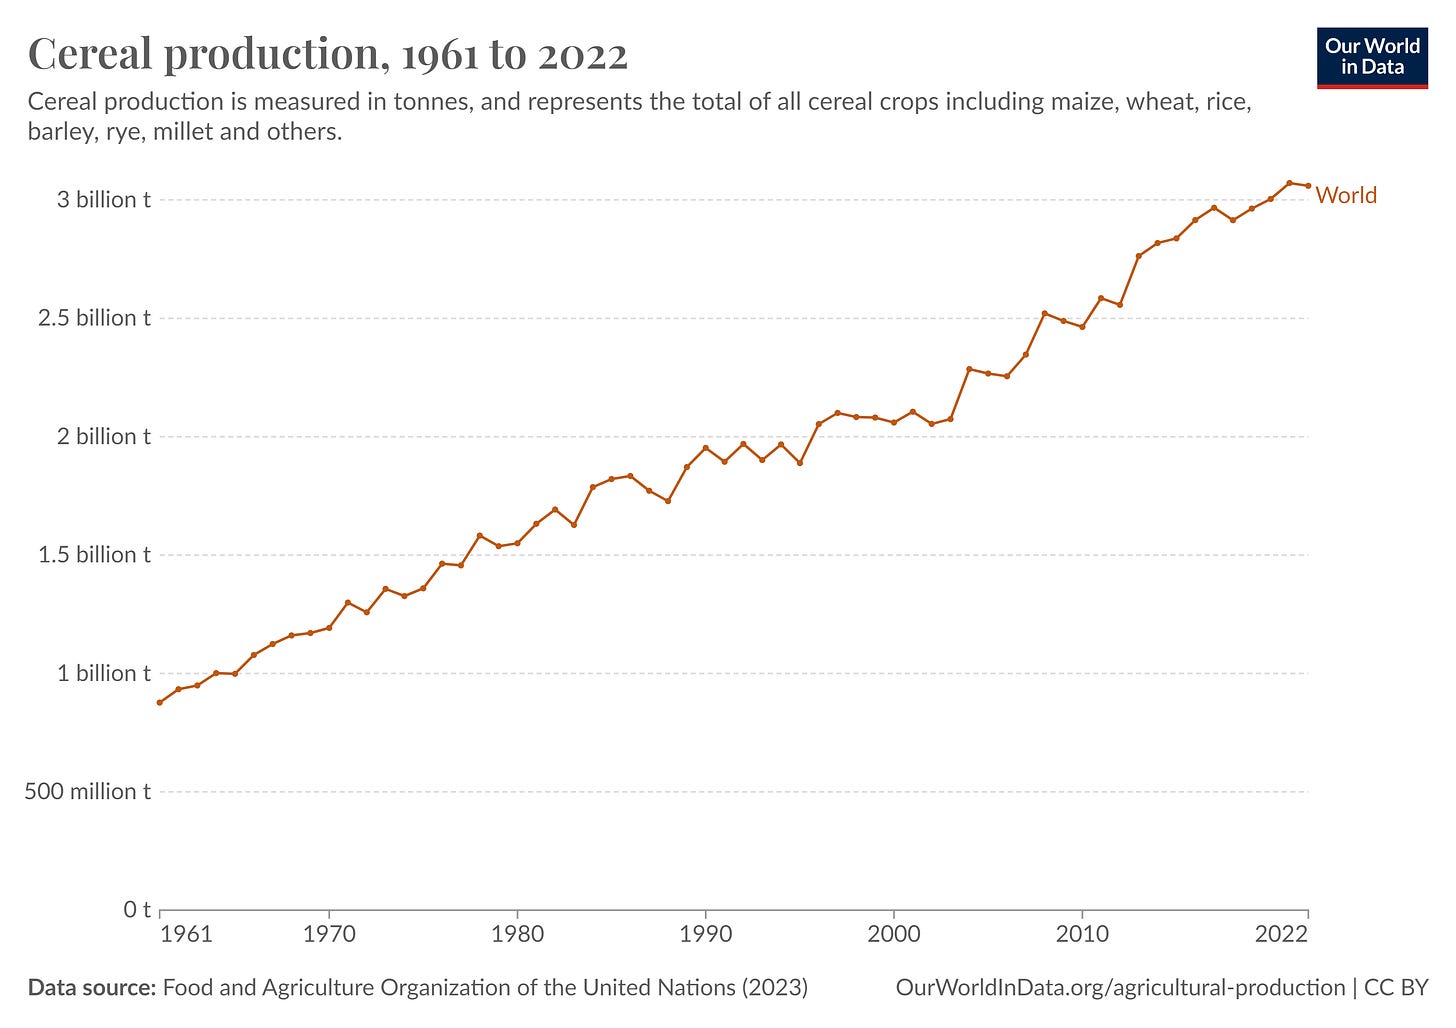 Figure D - Global Cereal Production (Our World in Data)